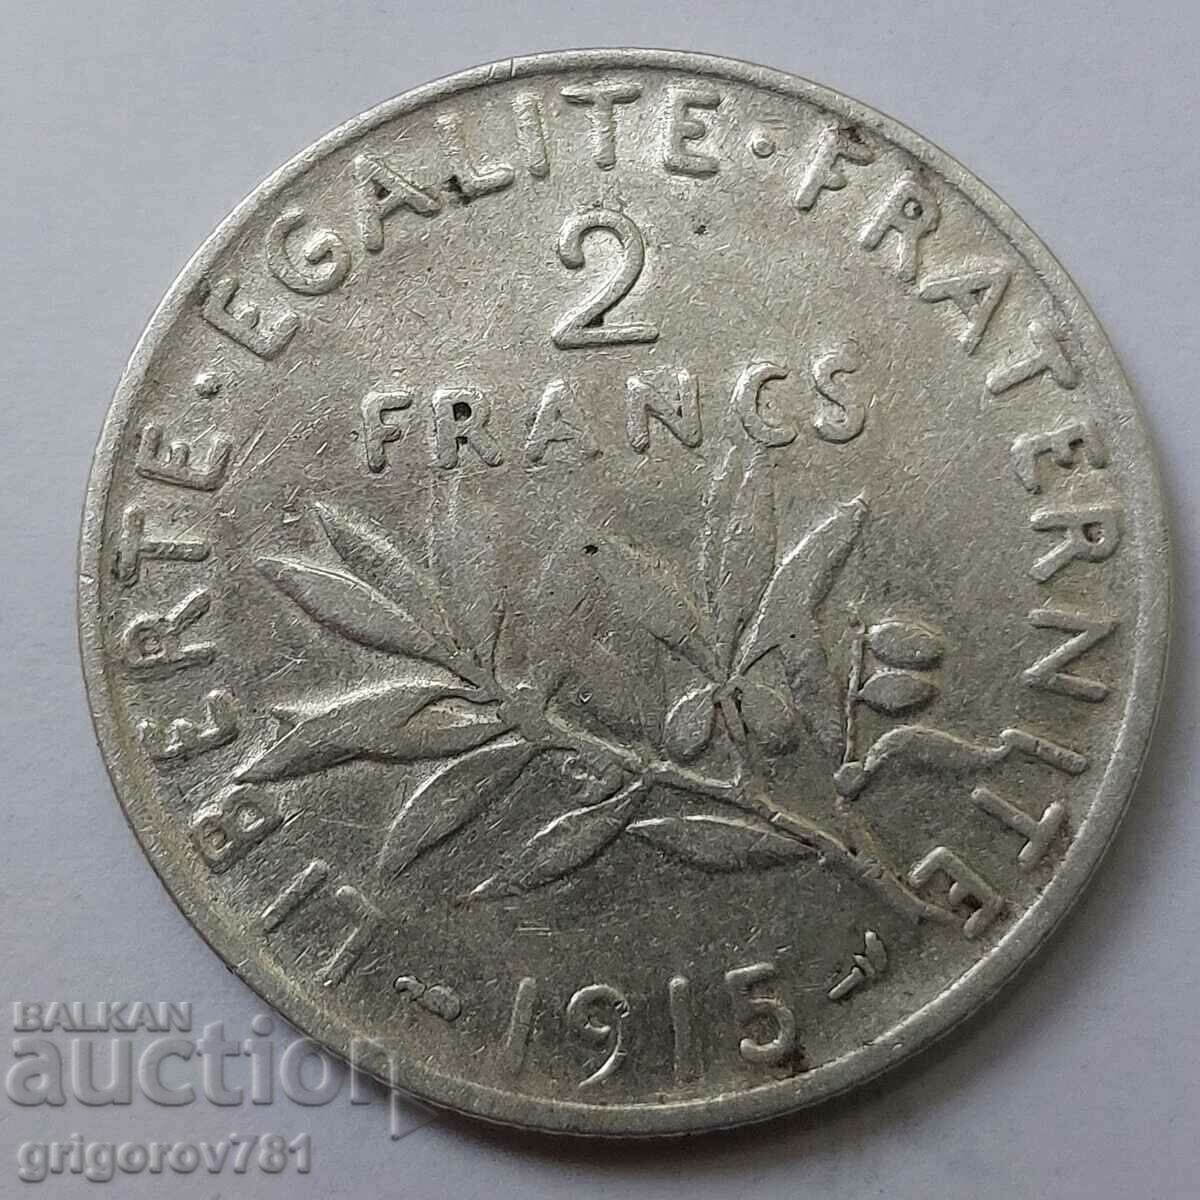 2 Francs Silver France 1915 - Silver Coin #53